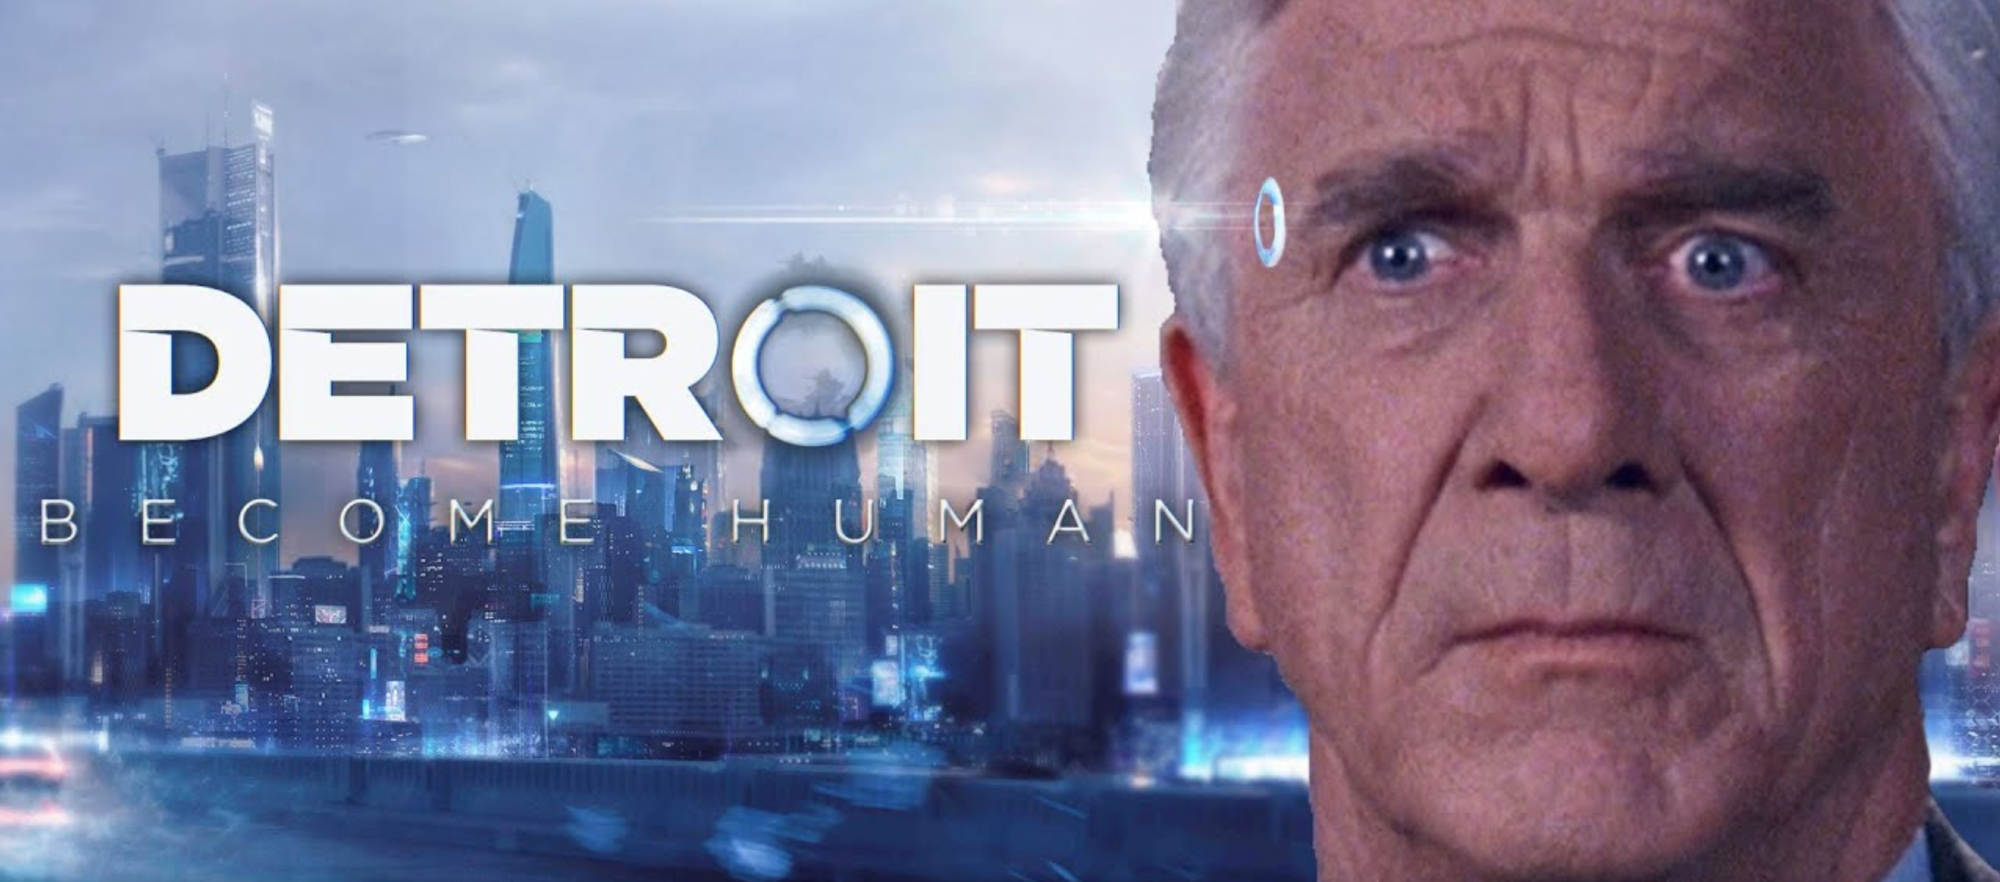 Detroit - Become Human: Frank Drebin from "The Naked Gun" in the Mashup - News